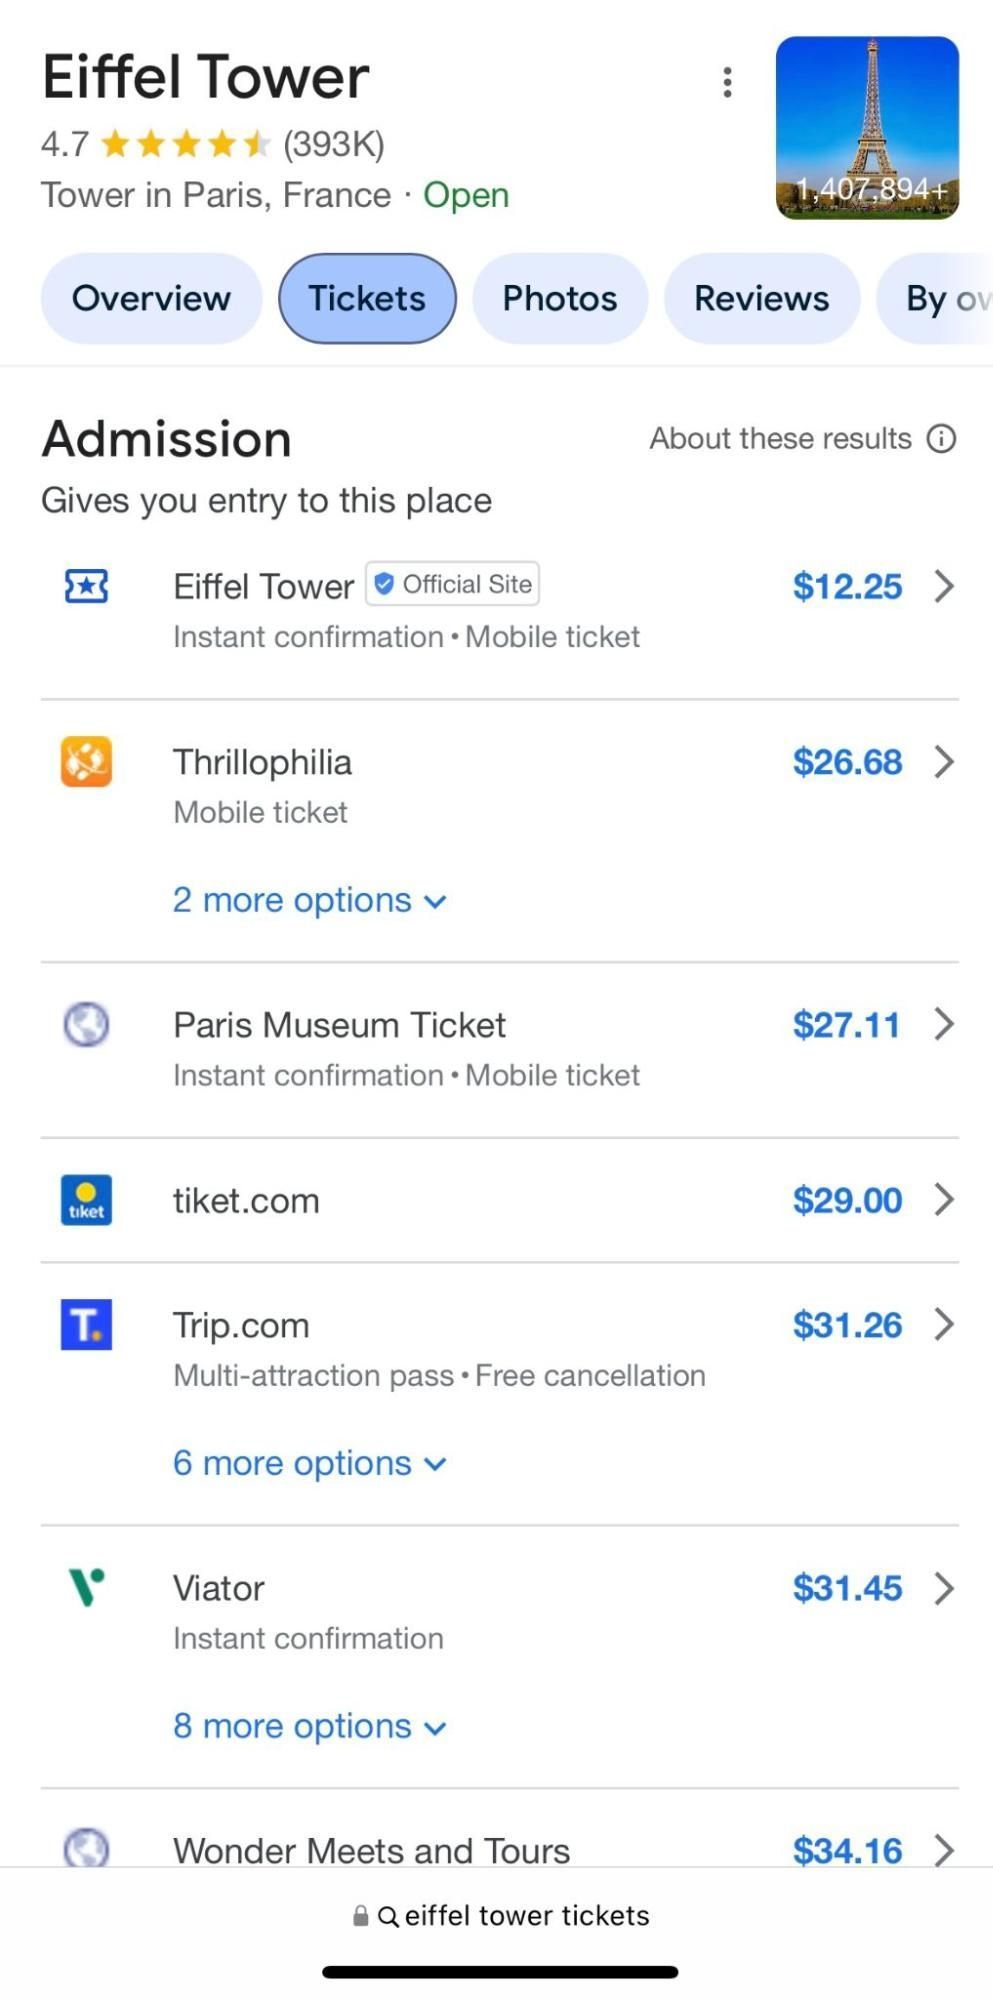 Eiffel Tower Ticket pricing in Google search